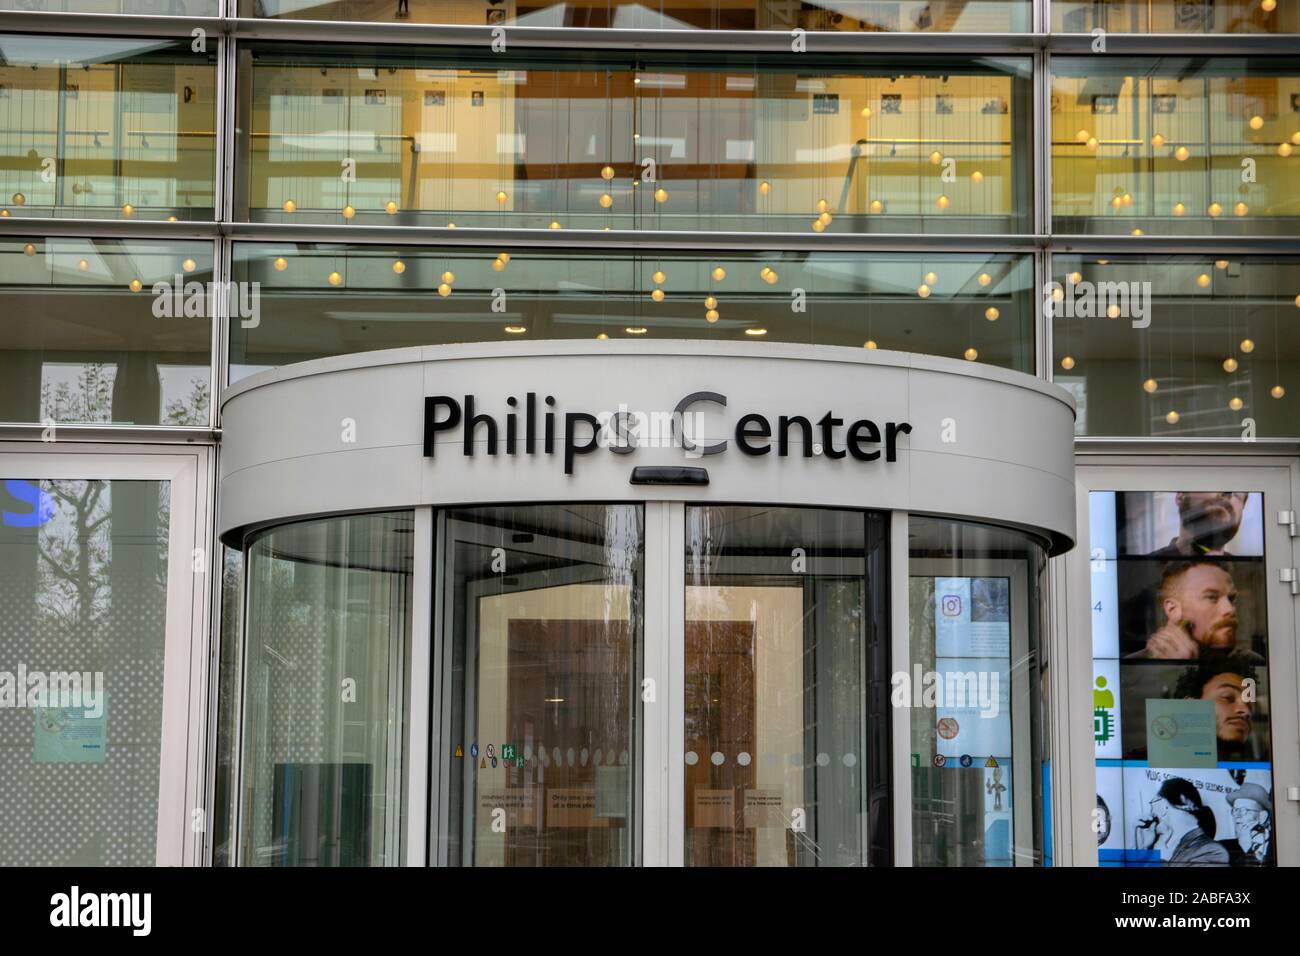 Entrance Philips Headquarters Building At Amsterdam The Netherlands 2019 Stock Photo